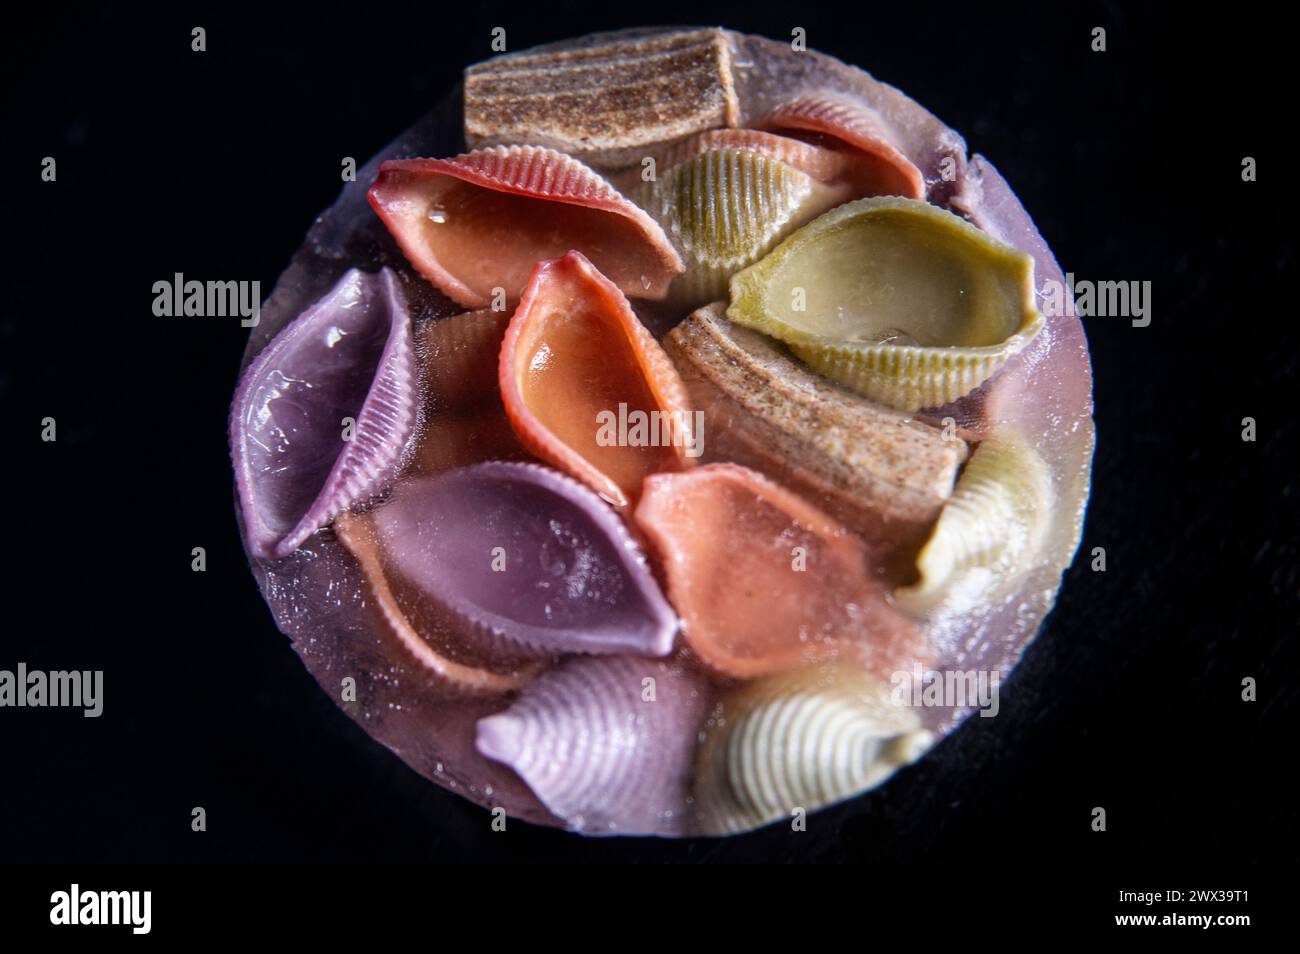 Close-up of colourful rigatoni and shell pasta shapes frozen in ice against a black background. Stock Photo